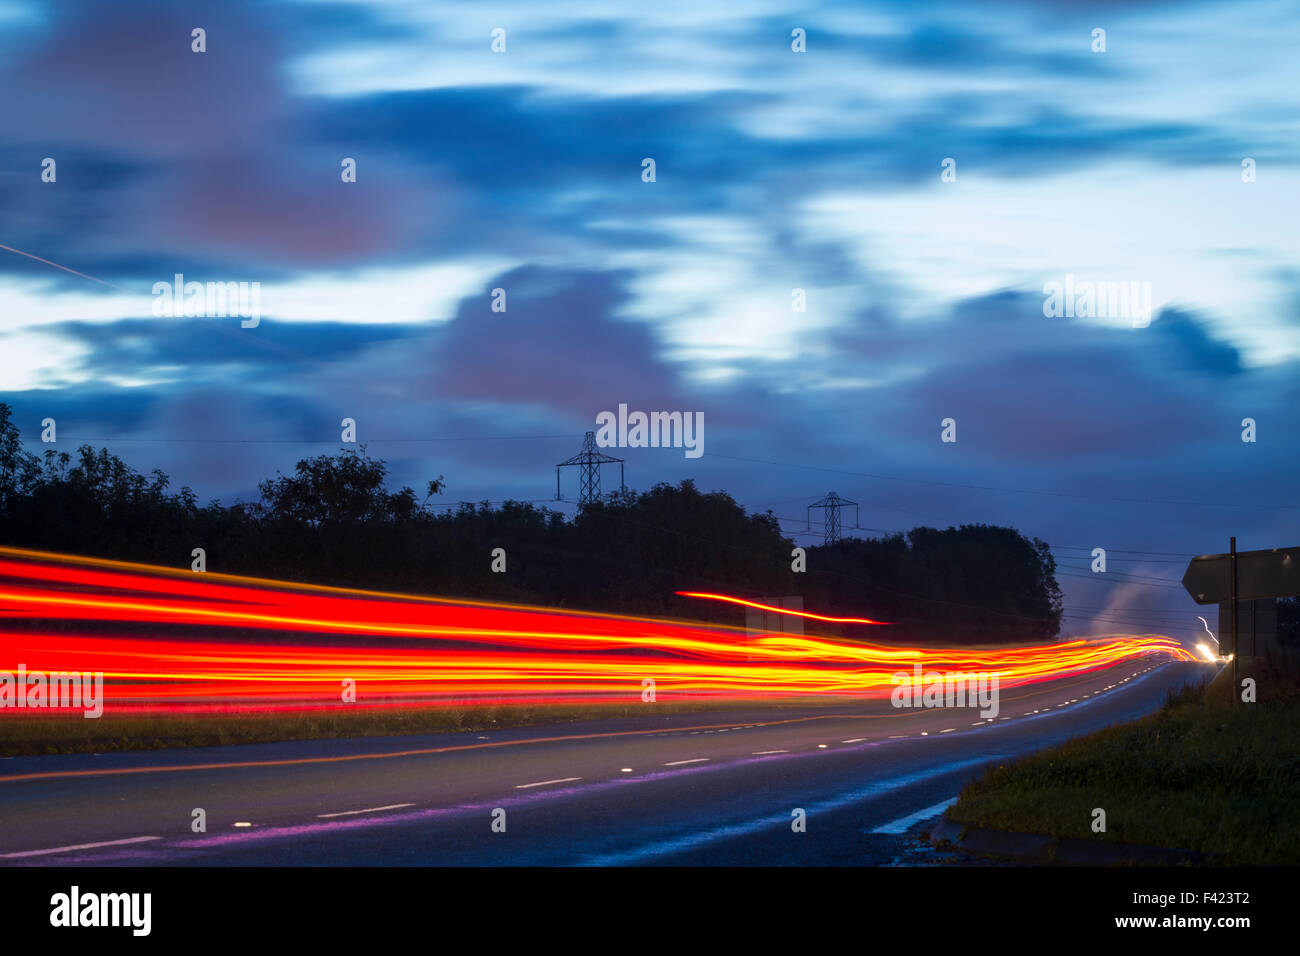 Billingham, UK. 14th October, 2015. UK Weather: light trails of cars and fuel tankers in pre dawn light on the Seal Sands road on a chilly morning in Billingham. The road leads to the enormous Seal Sands petro - chemical complex at the mouth of the river Tees Credit:  Alan Dawson News/Alamy Live News Stock Photo